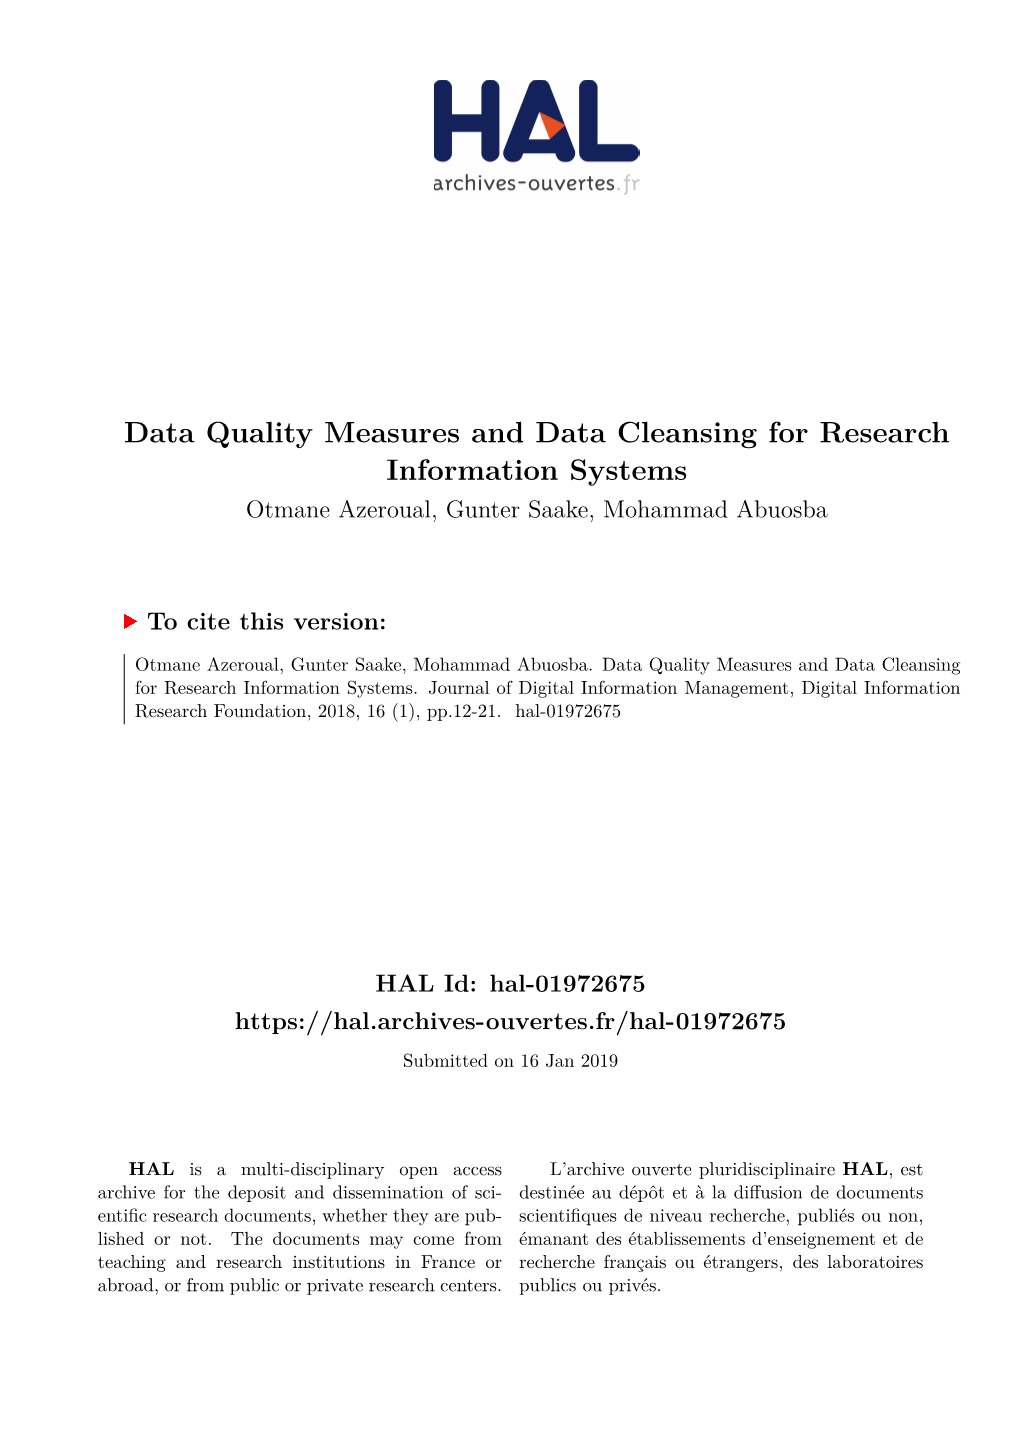 Data Quality Measures and Data Cleansing for Research Information Systems Otmane Azeroual, Gunter Saake, Mohammad Abuosba